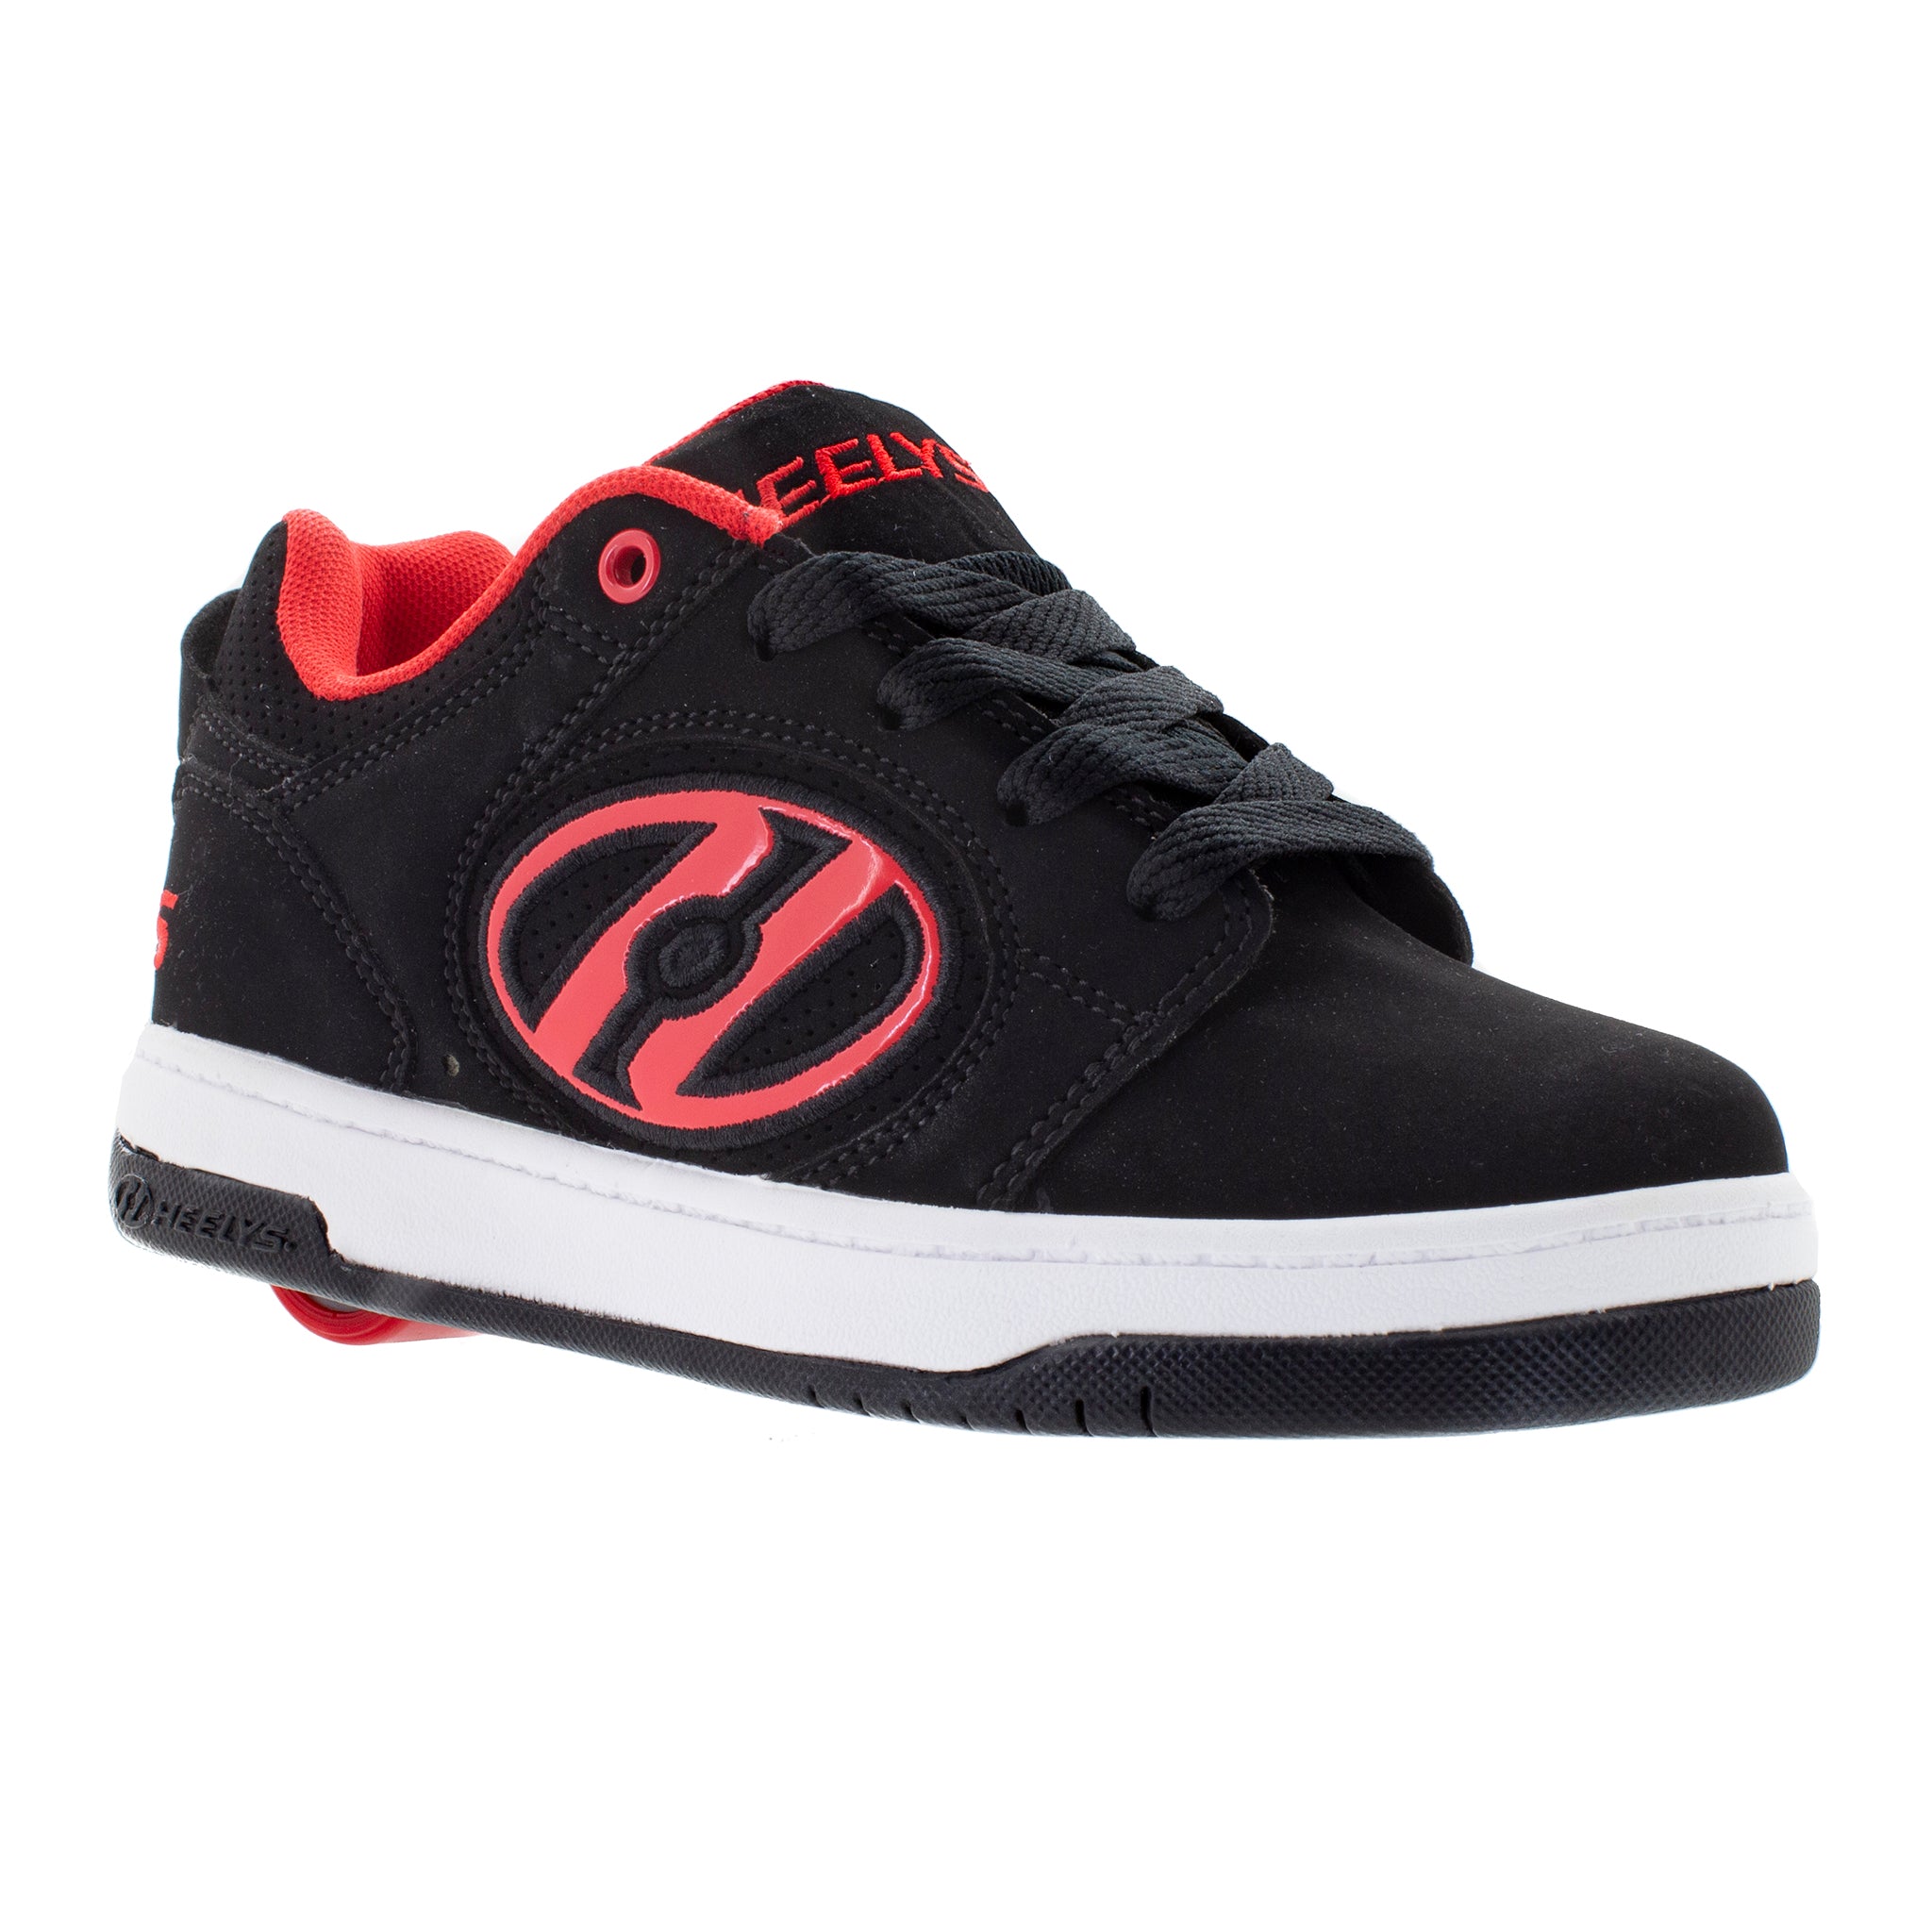 Are Heelys Good Shoes?